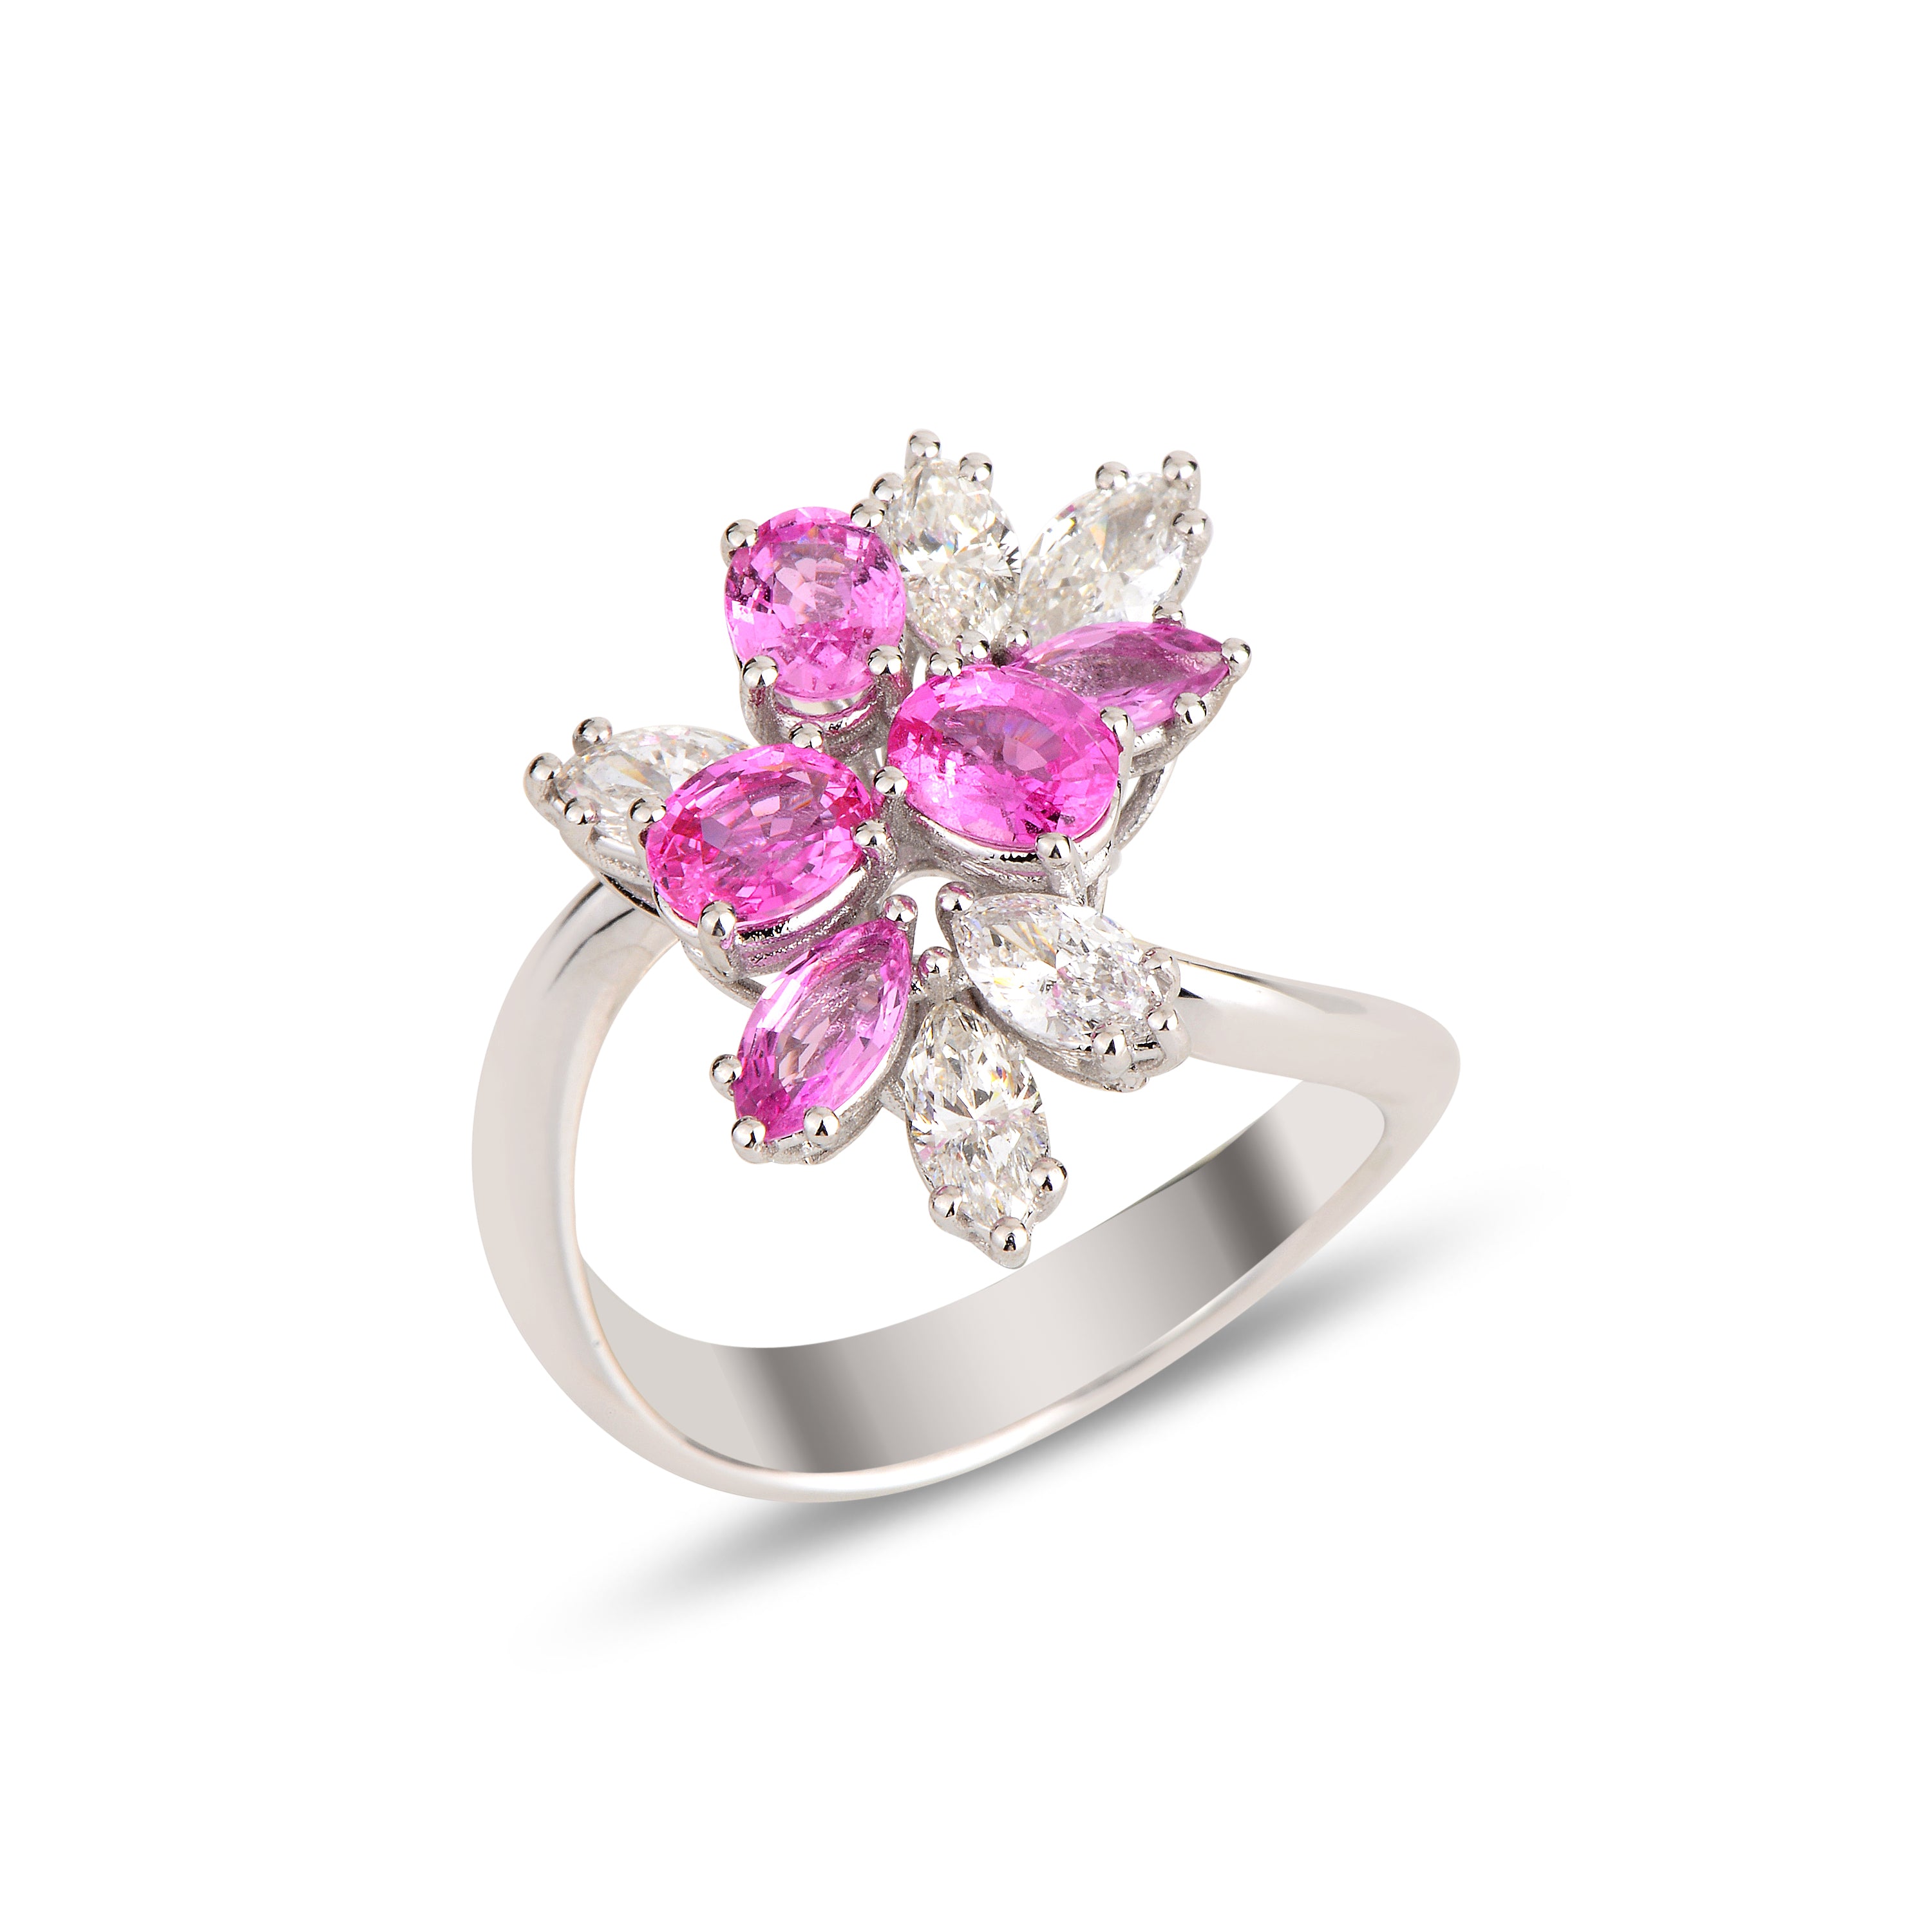 Blossom III Ring with Pink Sapphire